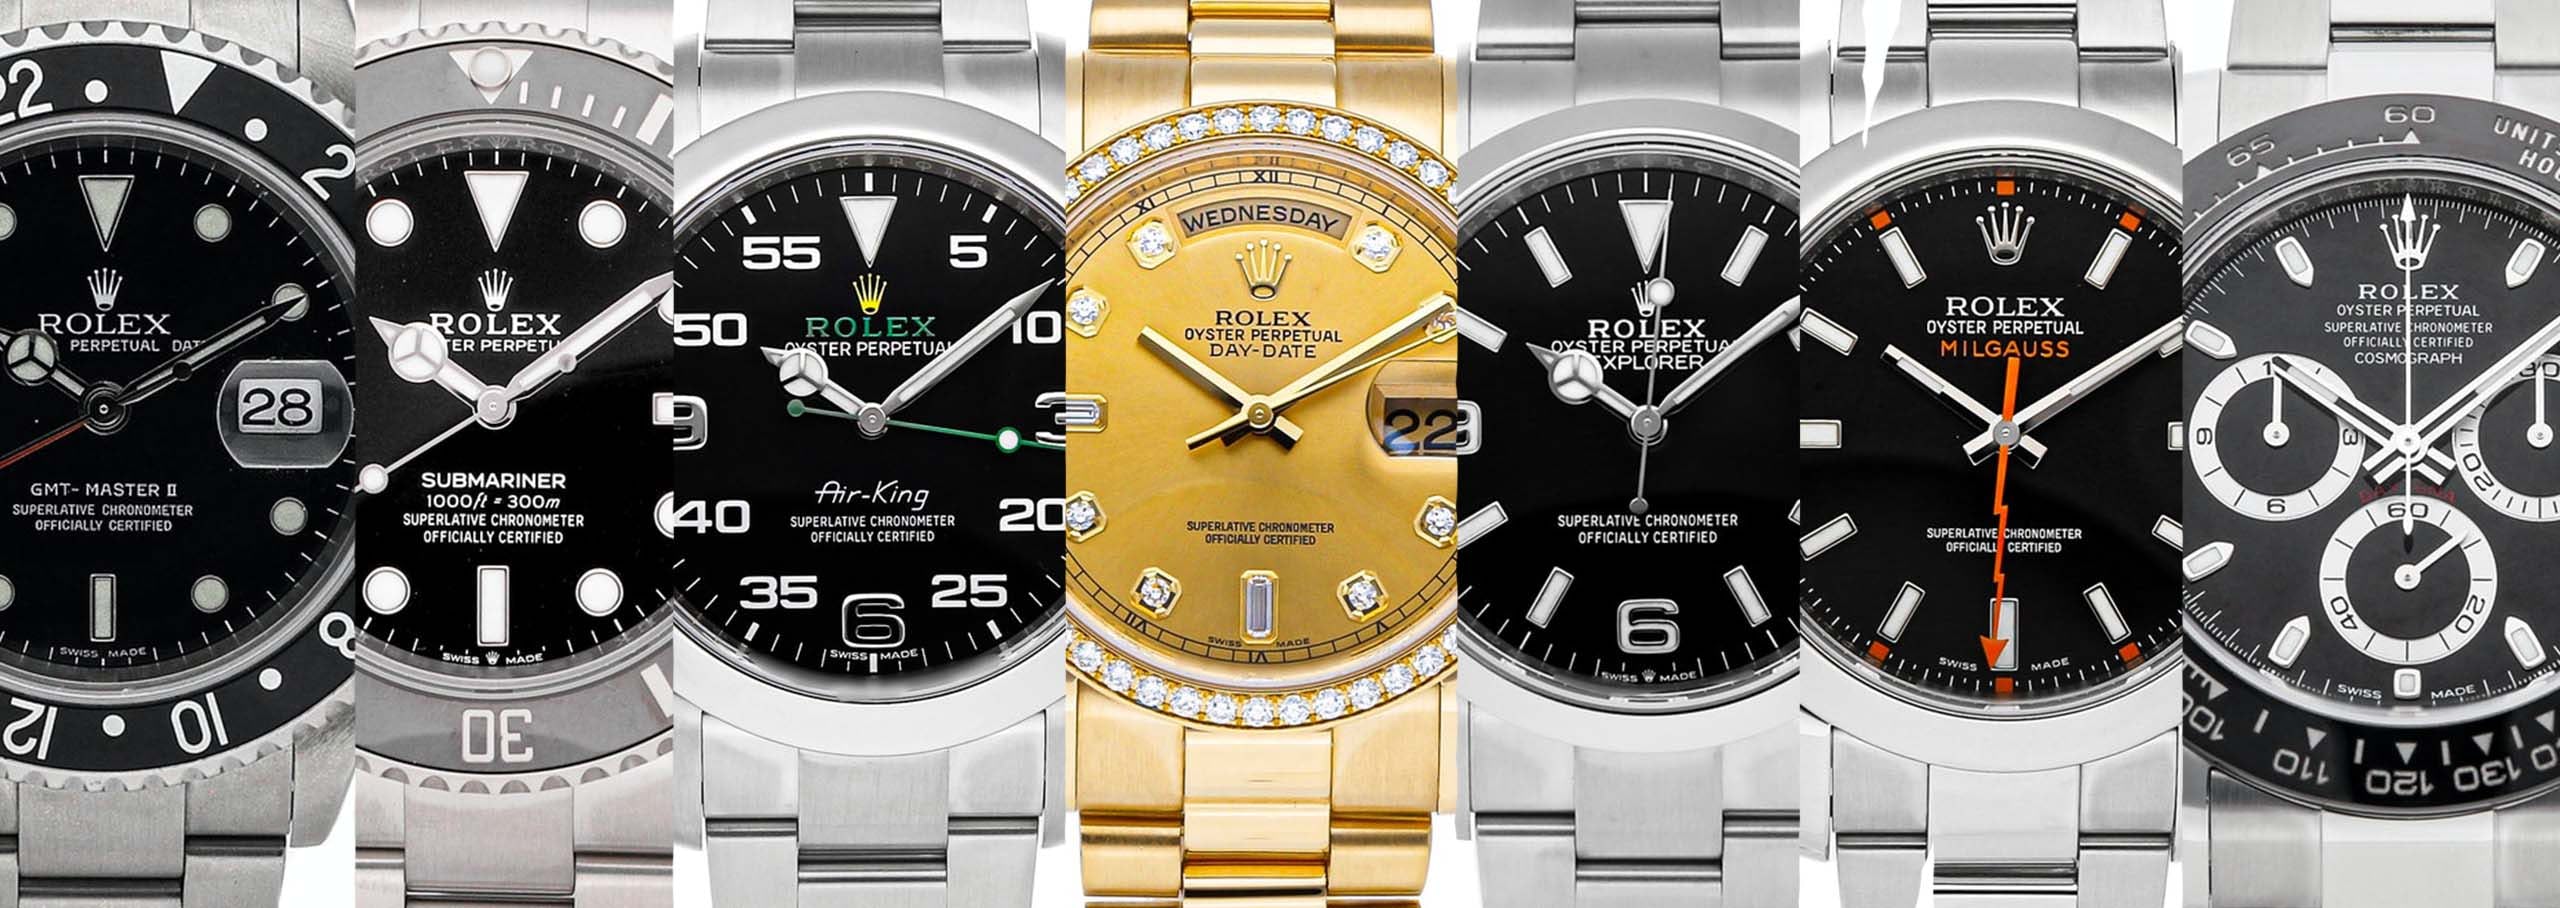 Rolex Oyster Perpetual Ultimate Guide